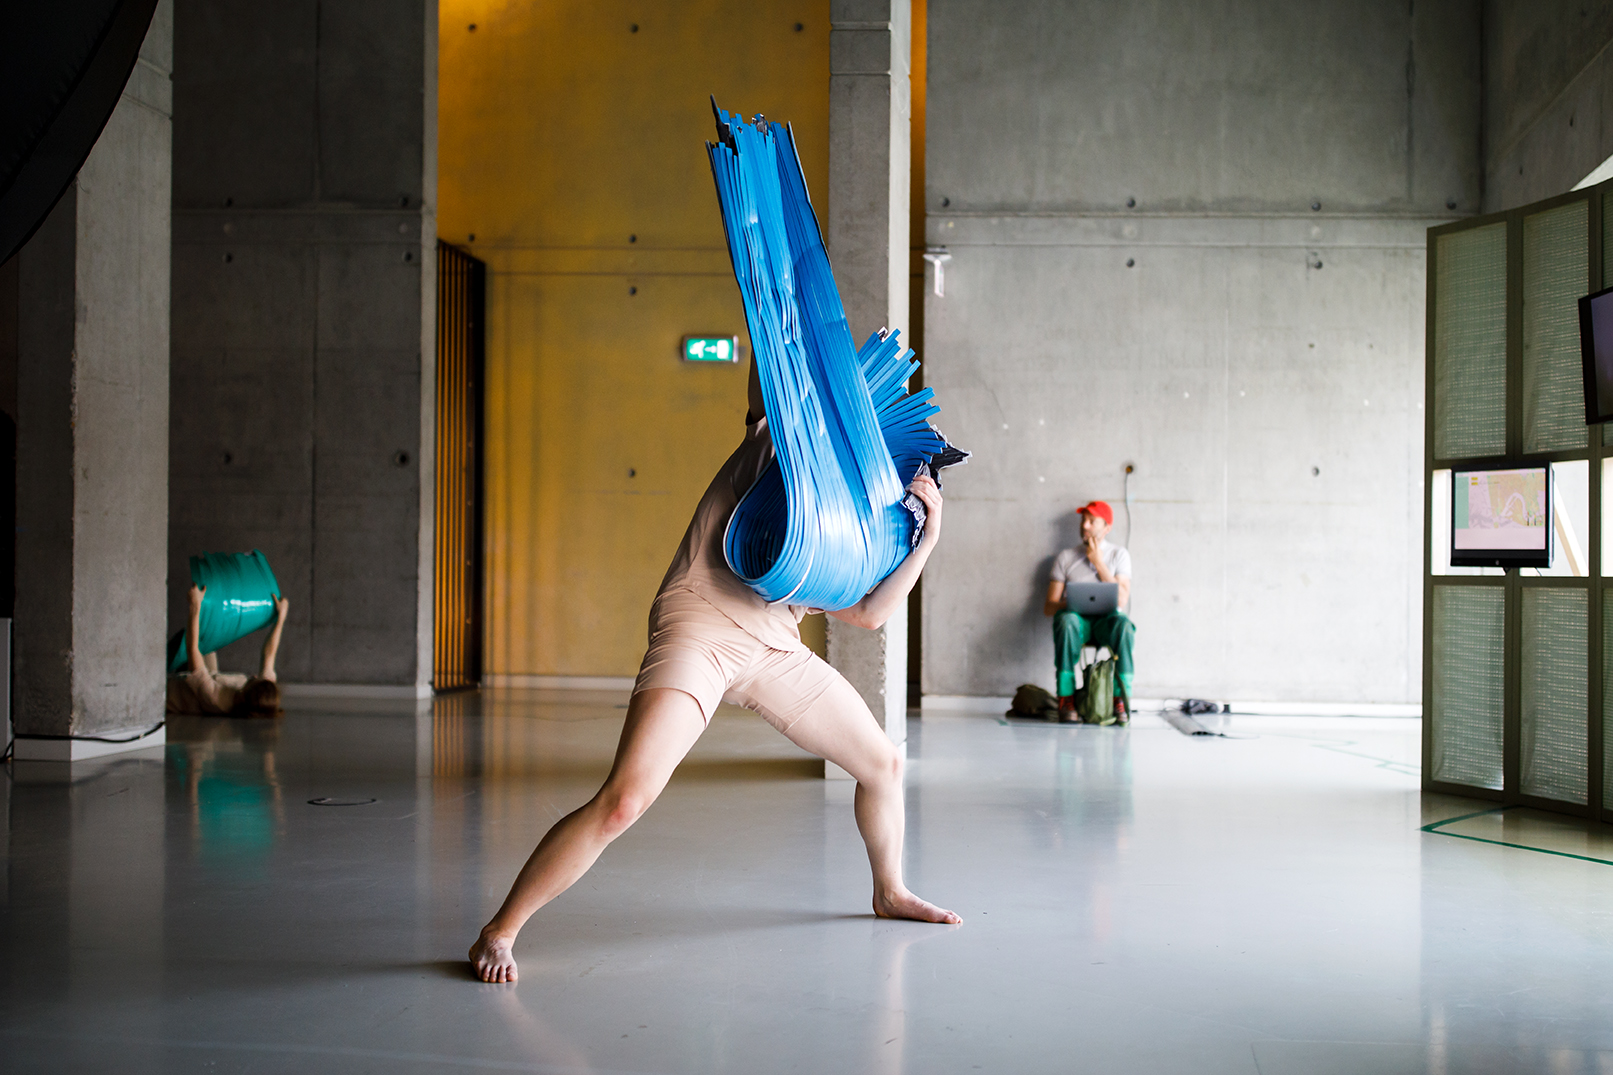 Dancer in nude costume holds a three dimensional blue object, obstructing their face.